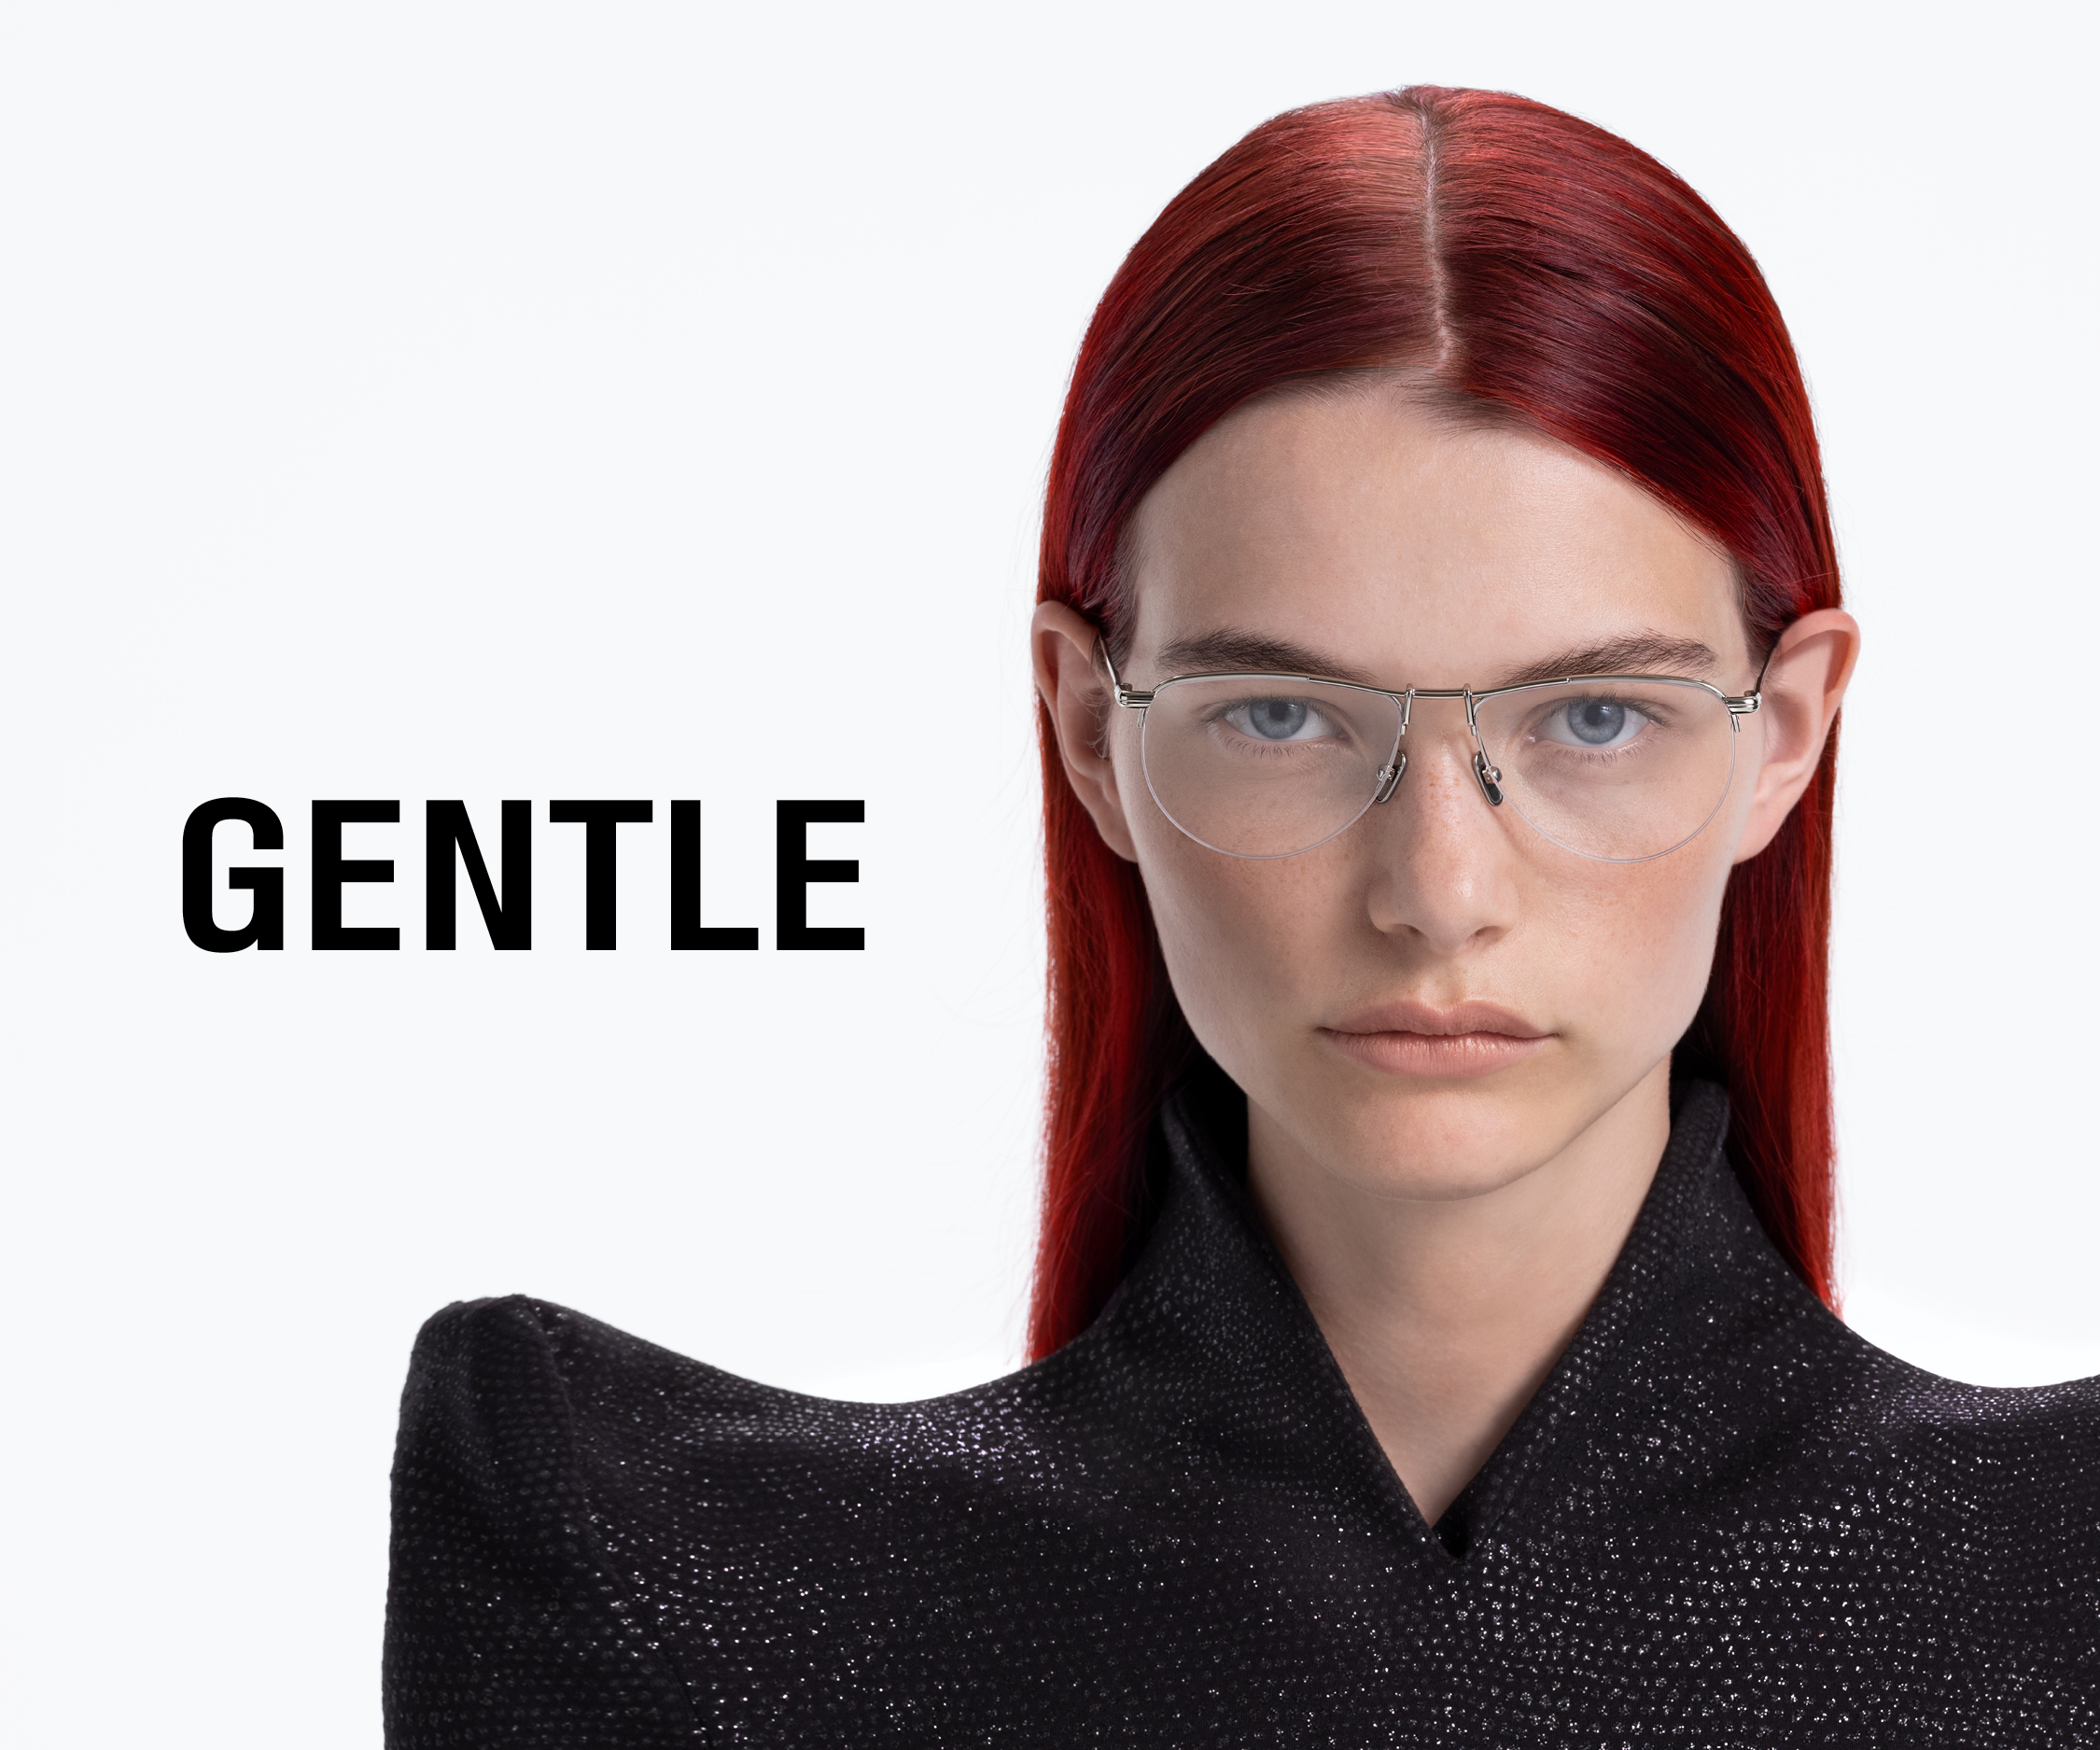 Gentle Monster's First Optical Collection and Campaign “GENTLE” Speak For  Individuality - V Magazine